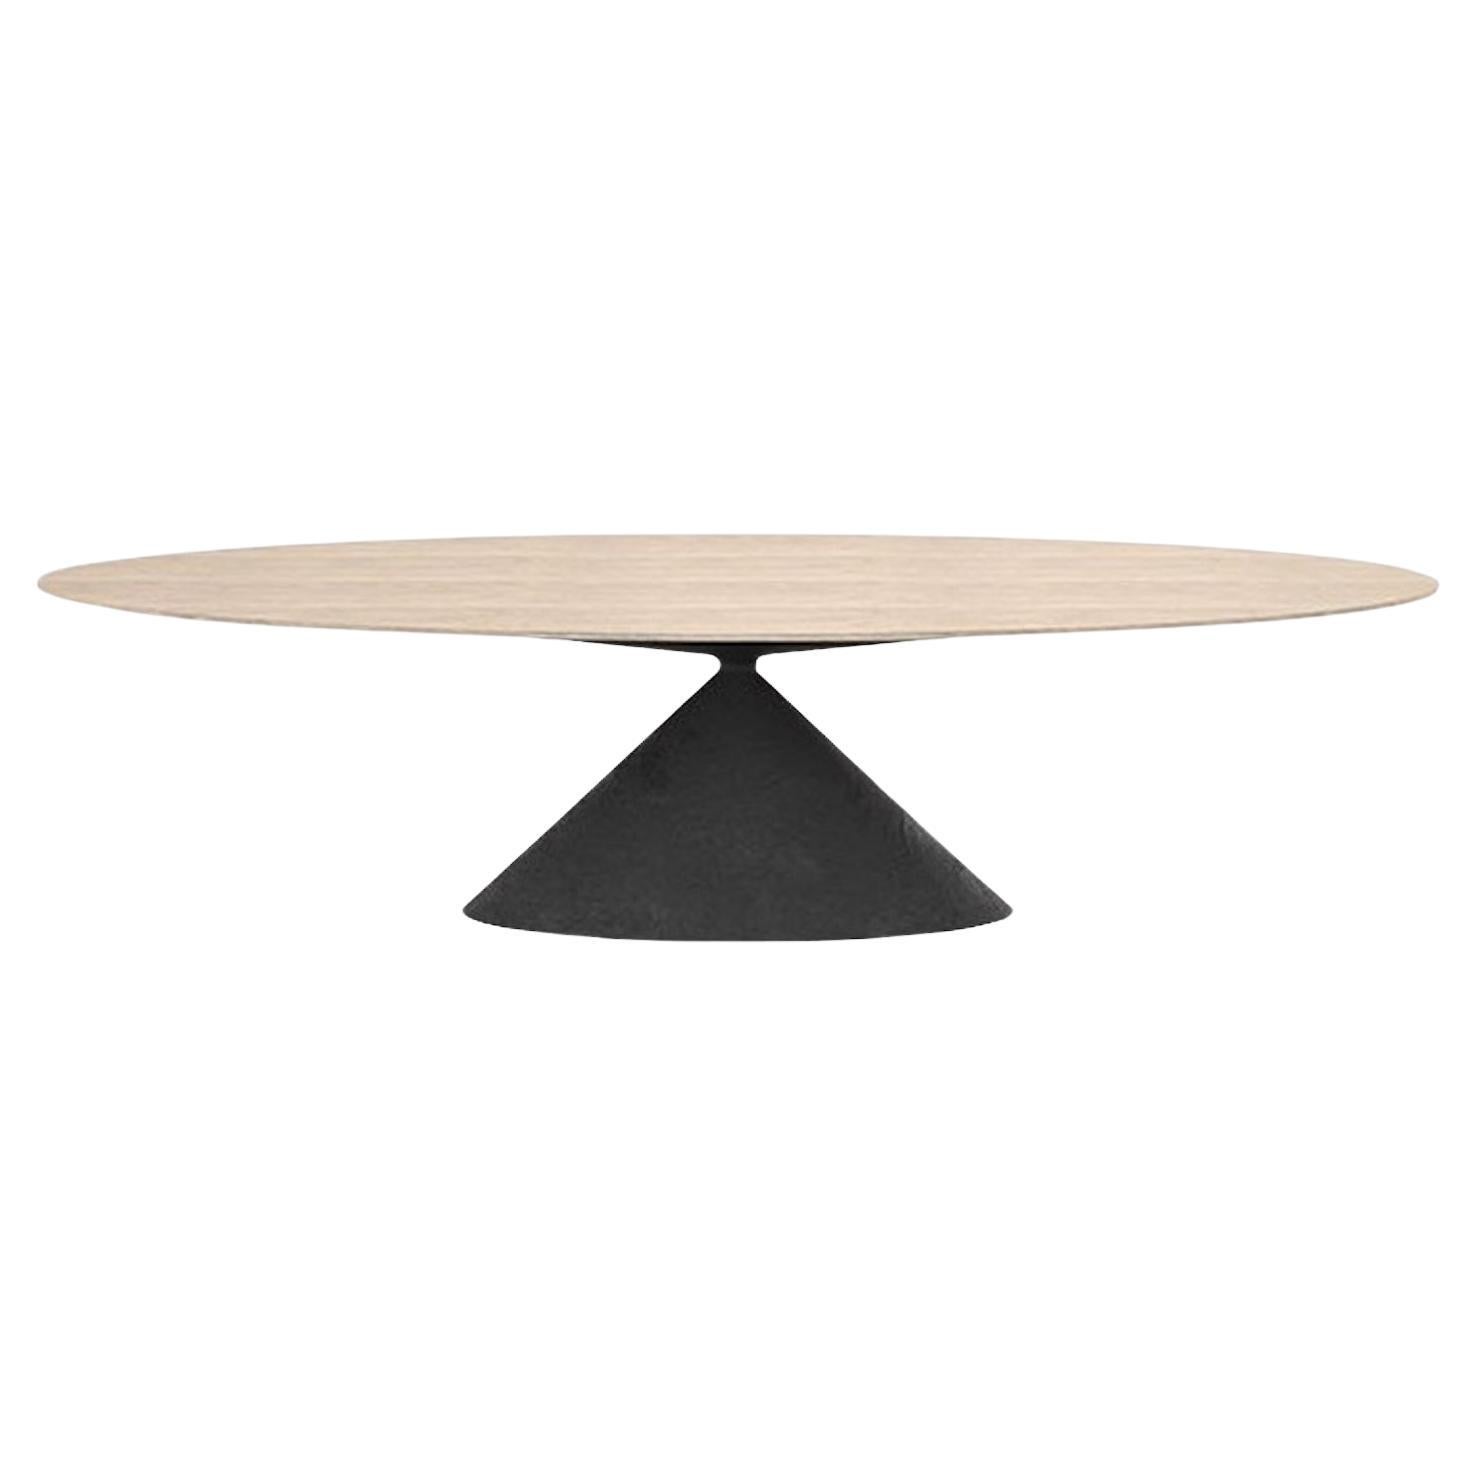 Customizable Desalto Maxi Clay Table with Ash Top by Marc Krusin